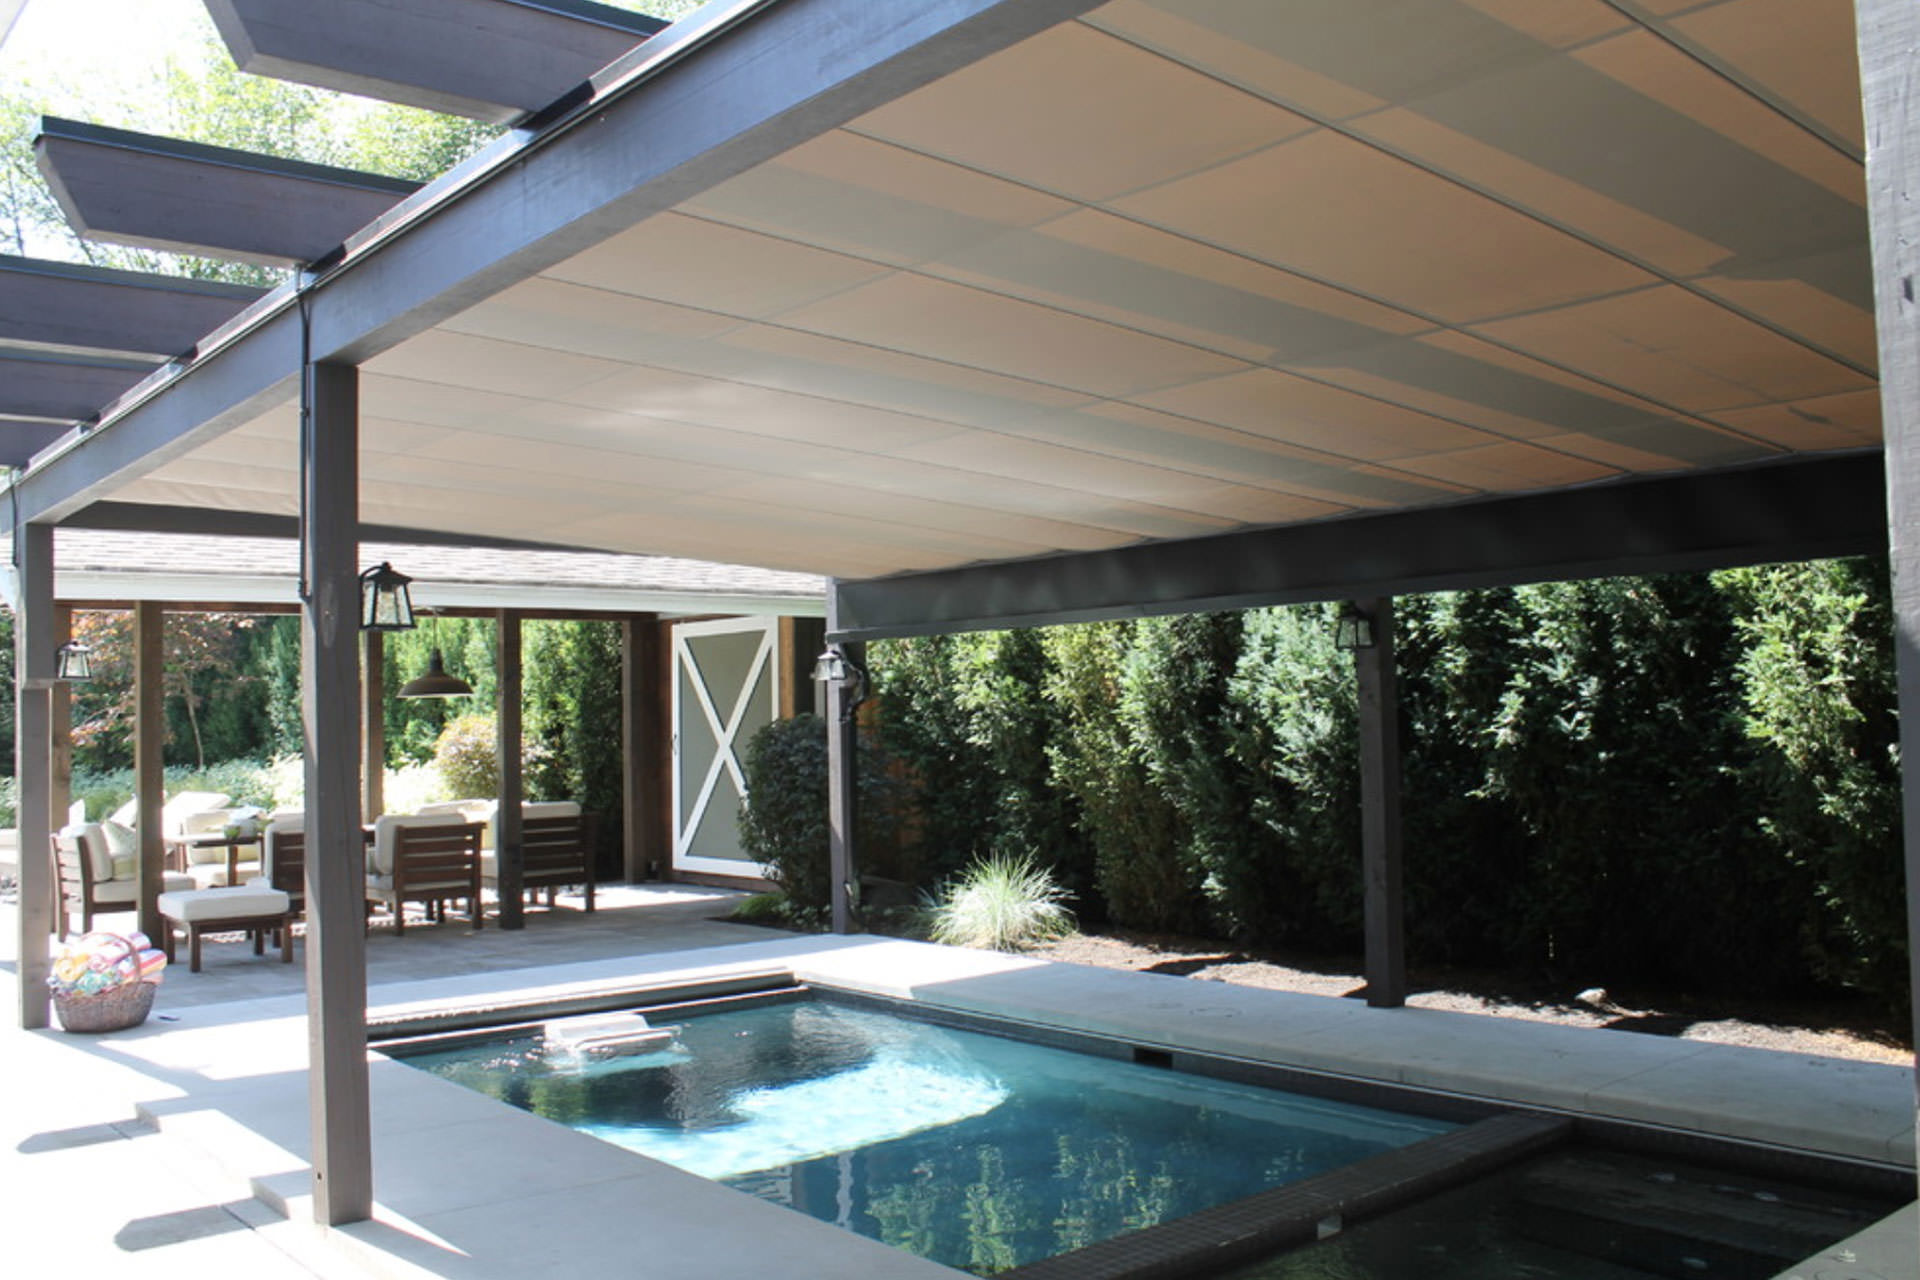 Pool Shade Ideas: 8 Ways to Cover Your Swimming Pool